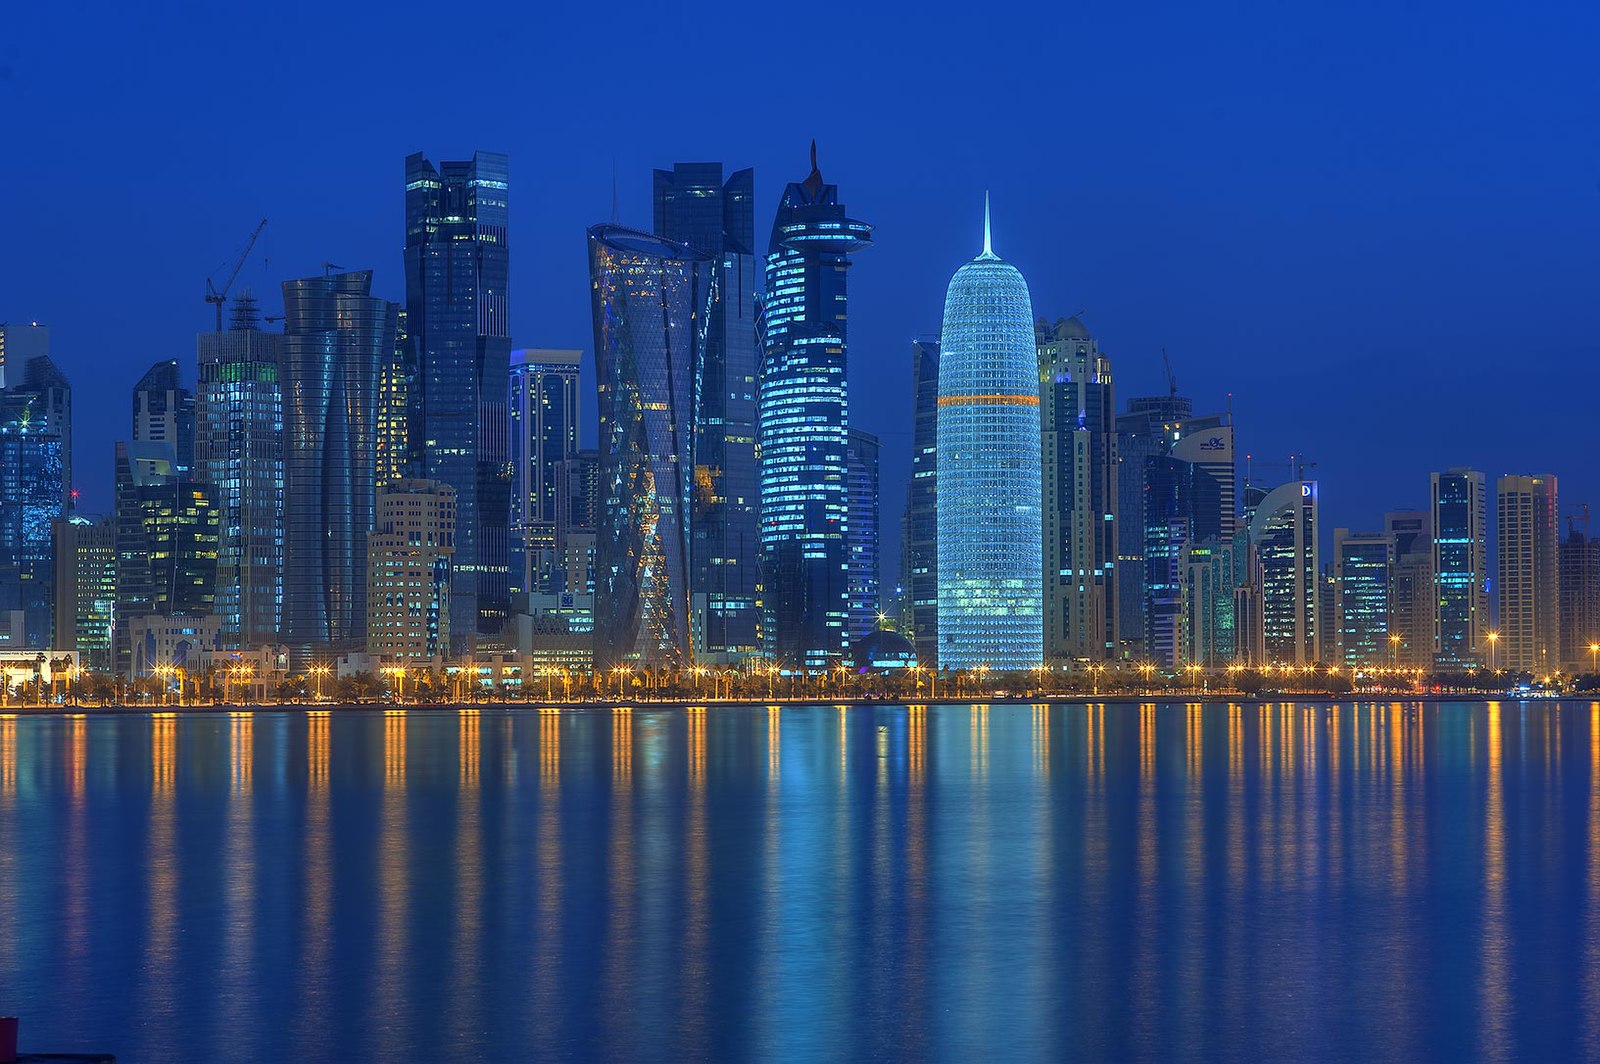 Fitch upgrades Qatar to ‘AA’ rating, forecasts fiscal surplus until 2030